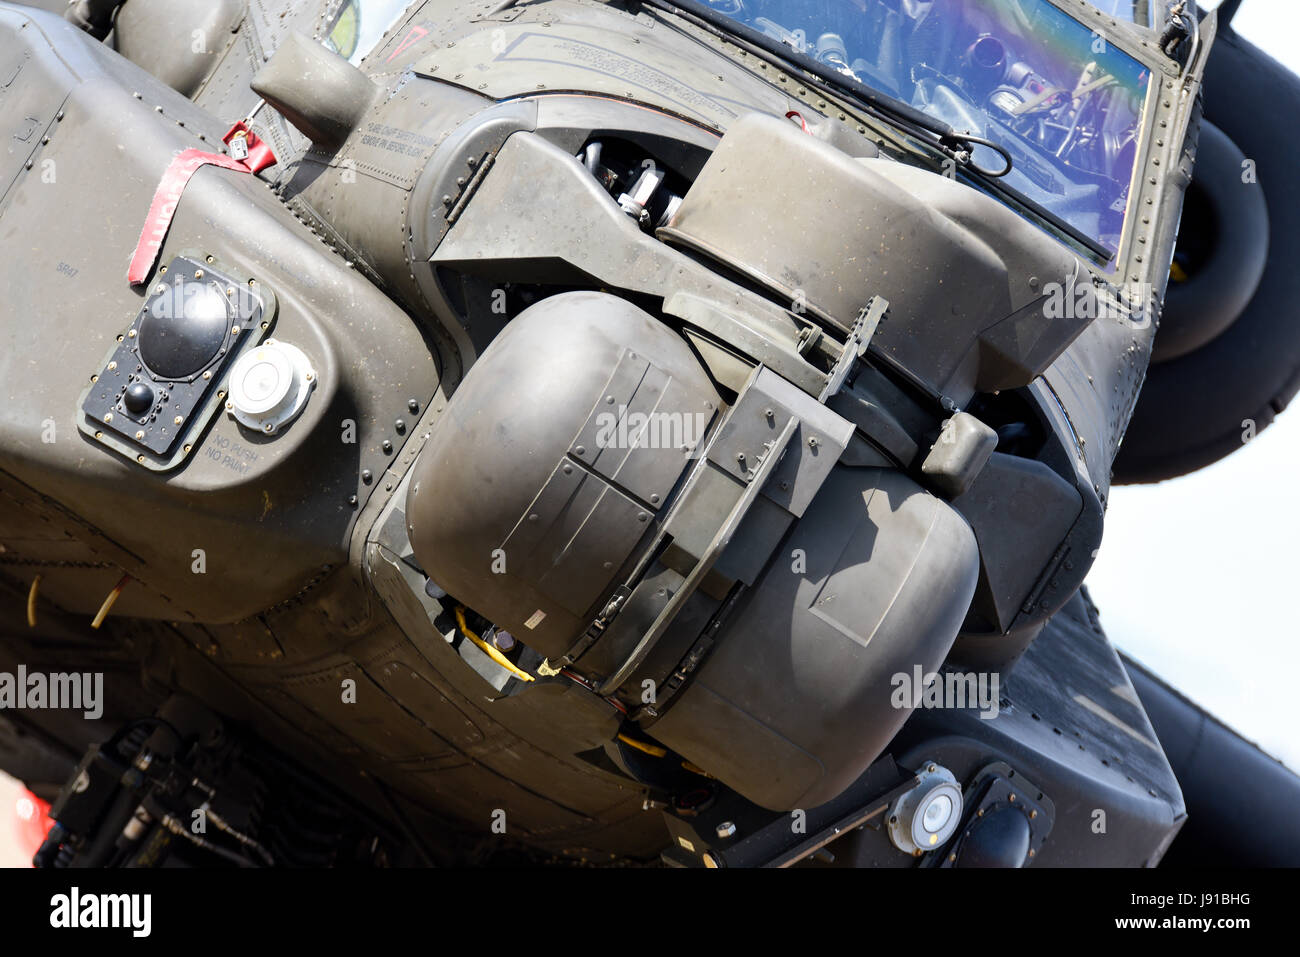 British Army, Army Air Corps, Agusta Westland AH-64D Apache Longbow AH-1 attack helicopter nose details. Targeting sensors Stock Photo